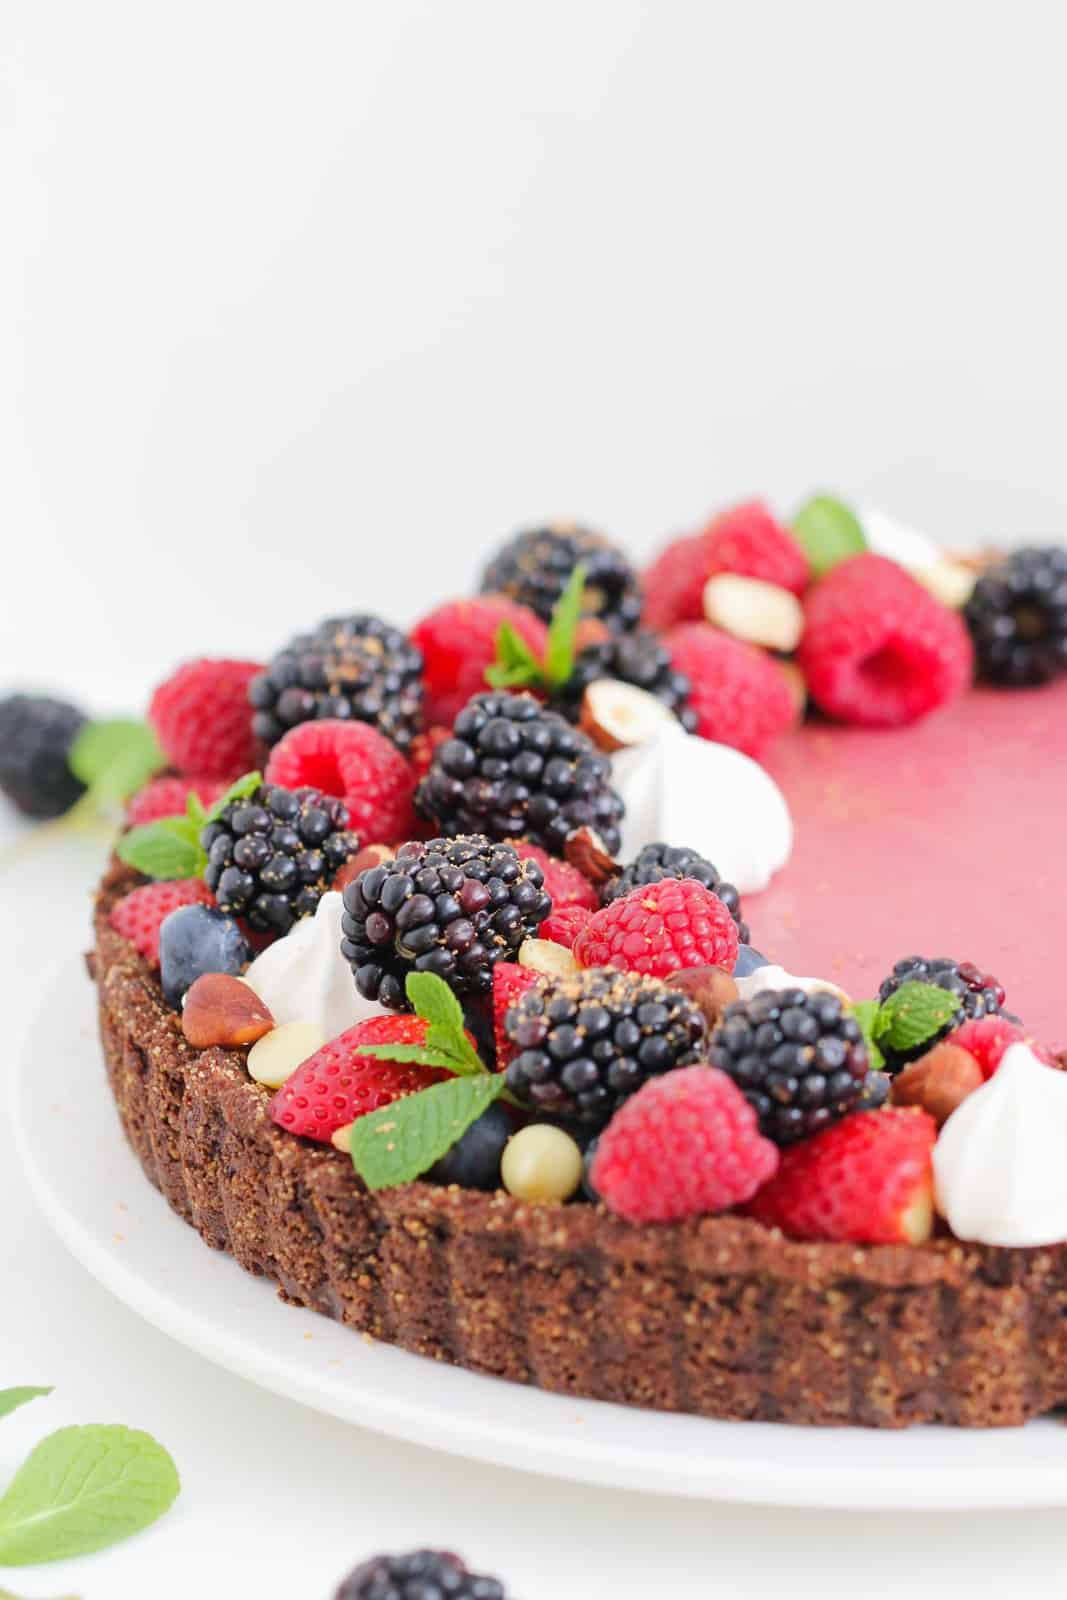 A berry tart with a chocolate base covered with fresh berries and mint leaves and meringues.